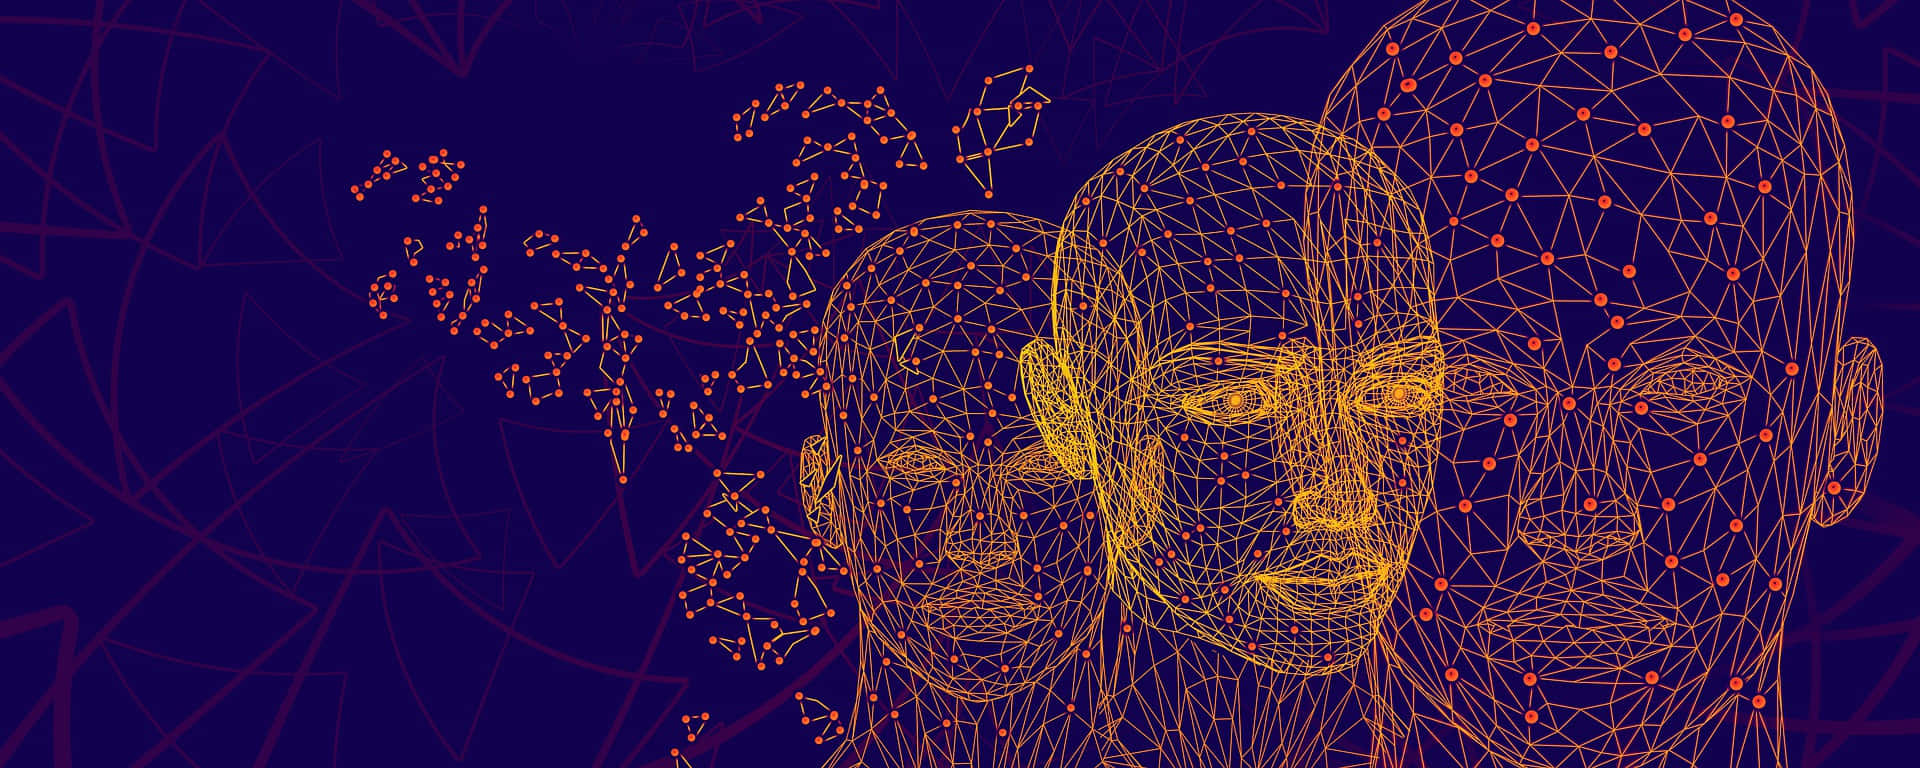 Human Head In A Work Of Constellation With Psychological Meaning Wallpaper